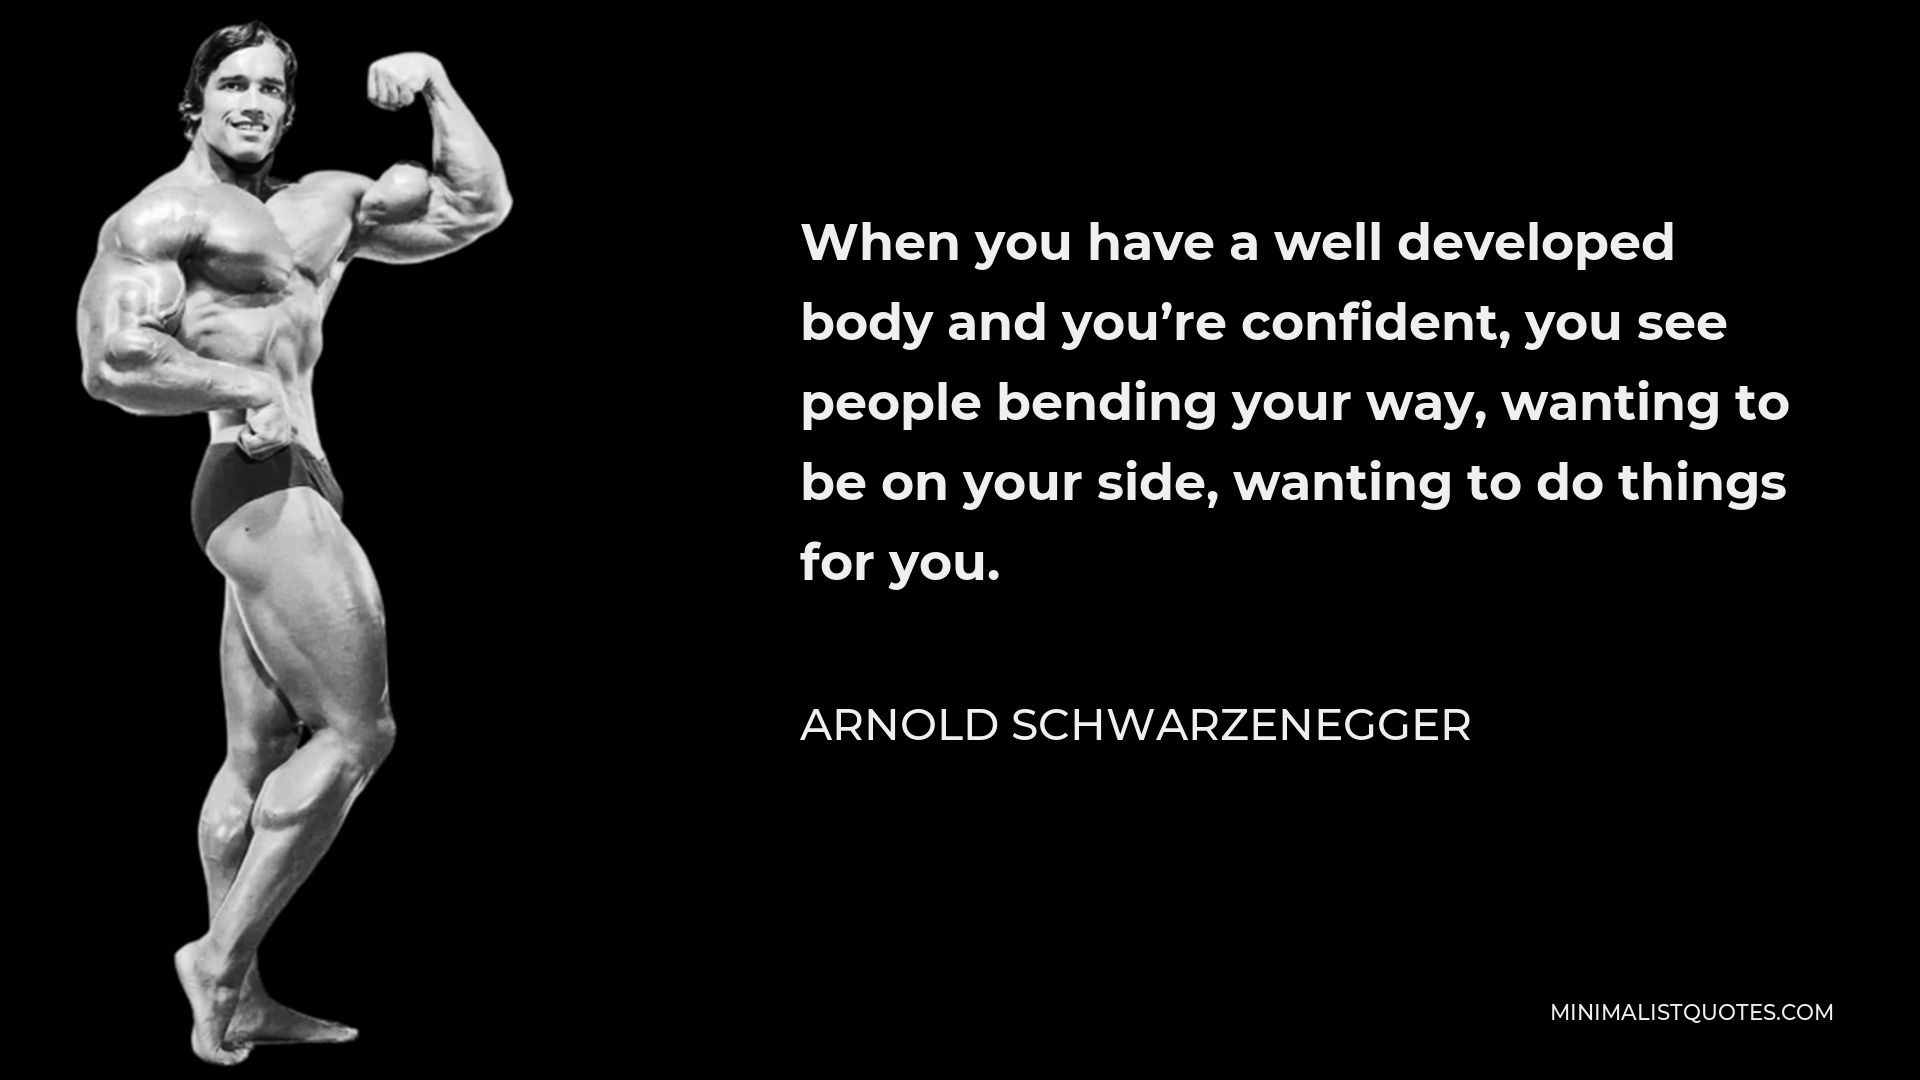 Arnold Schwarzenegger Quote - When you have a well developed body and you’re confident, you see people bending your way, wanting to be on your side, wanting to do things for you.